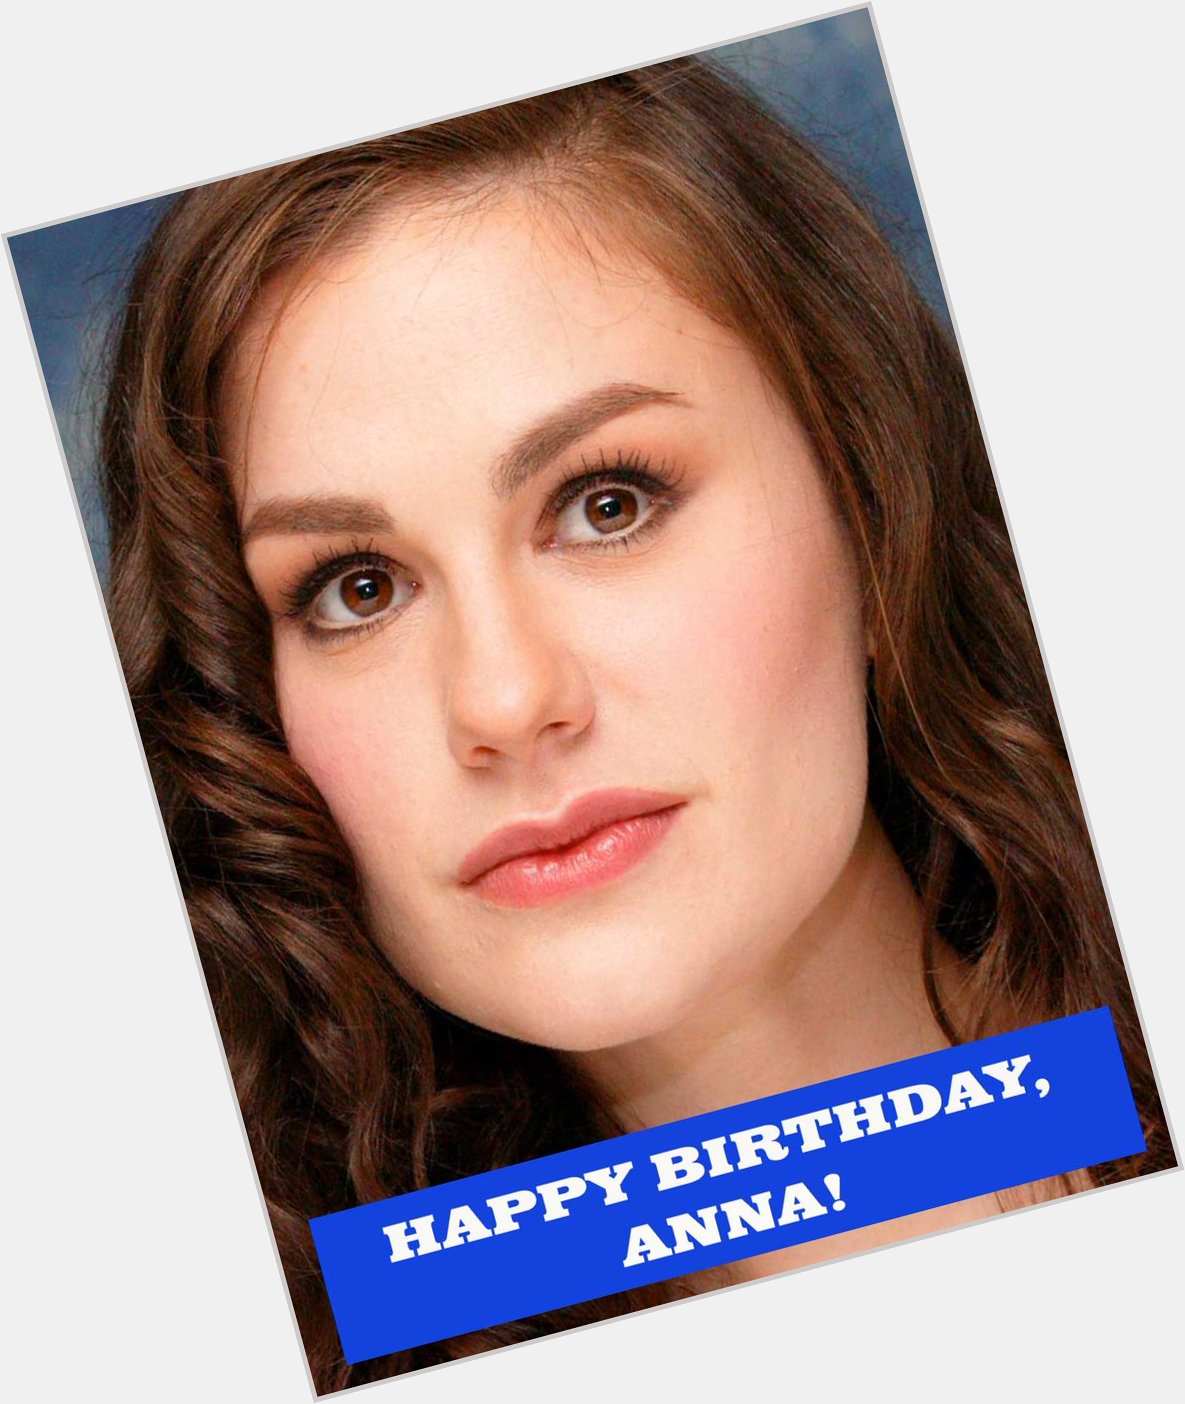 Wishing Anna Paquin a Happy Birthday. A child star who has made an incredible transition to talented adult actress. 